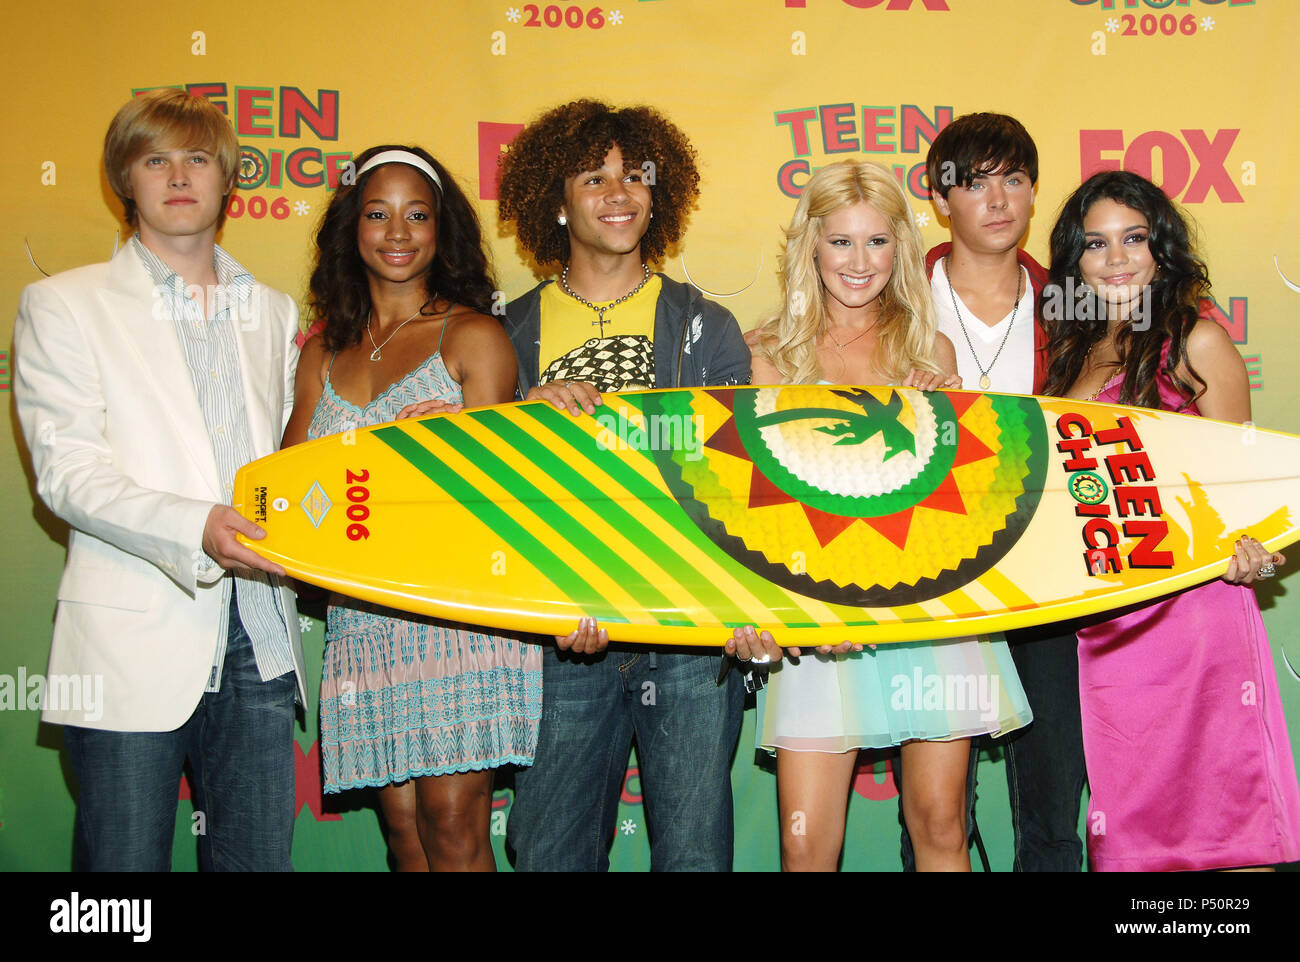 High School Musical cast at the TEEN CHOICE Awards at the Universal Amphitheatre  in Los Angeles. August 20, 2006.  full length trophy surf smile          -            HighSchoolMusical cast 140.jpgHighSchoolMusical cast 140  Event in Hollywood Life - California, Red Carpet Event, USA, Film Industry, Celebrities, Photography, Bestof, Arts Culture and Entertainment, Topix Celebrities fashion, Best of, Hollywood Life, Event in Hollywood Life - California,  backstage trophy, Awards show, movie celebrities, TV celebrities, Music celebrities, Topix, Bestof, Arts Culture and Entertainment, Photograp Stock Photo